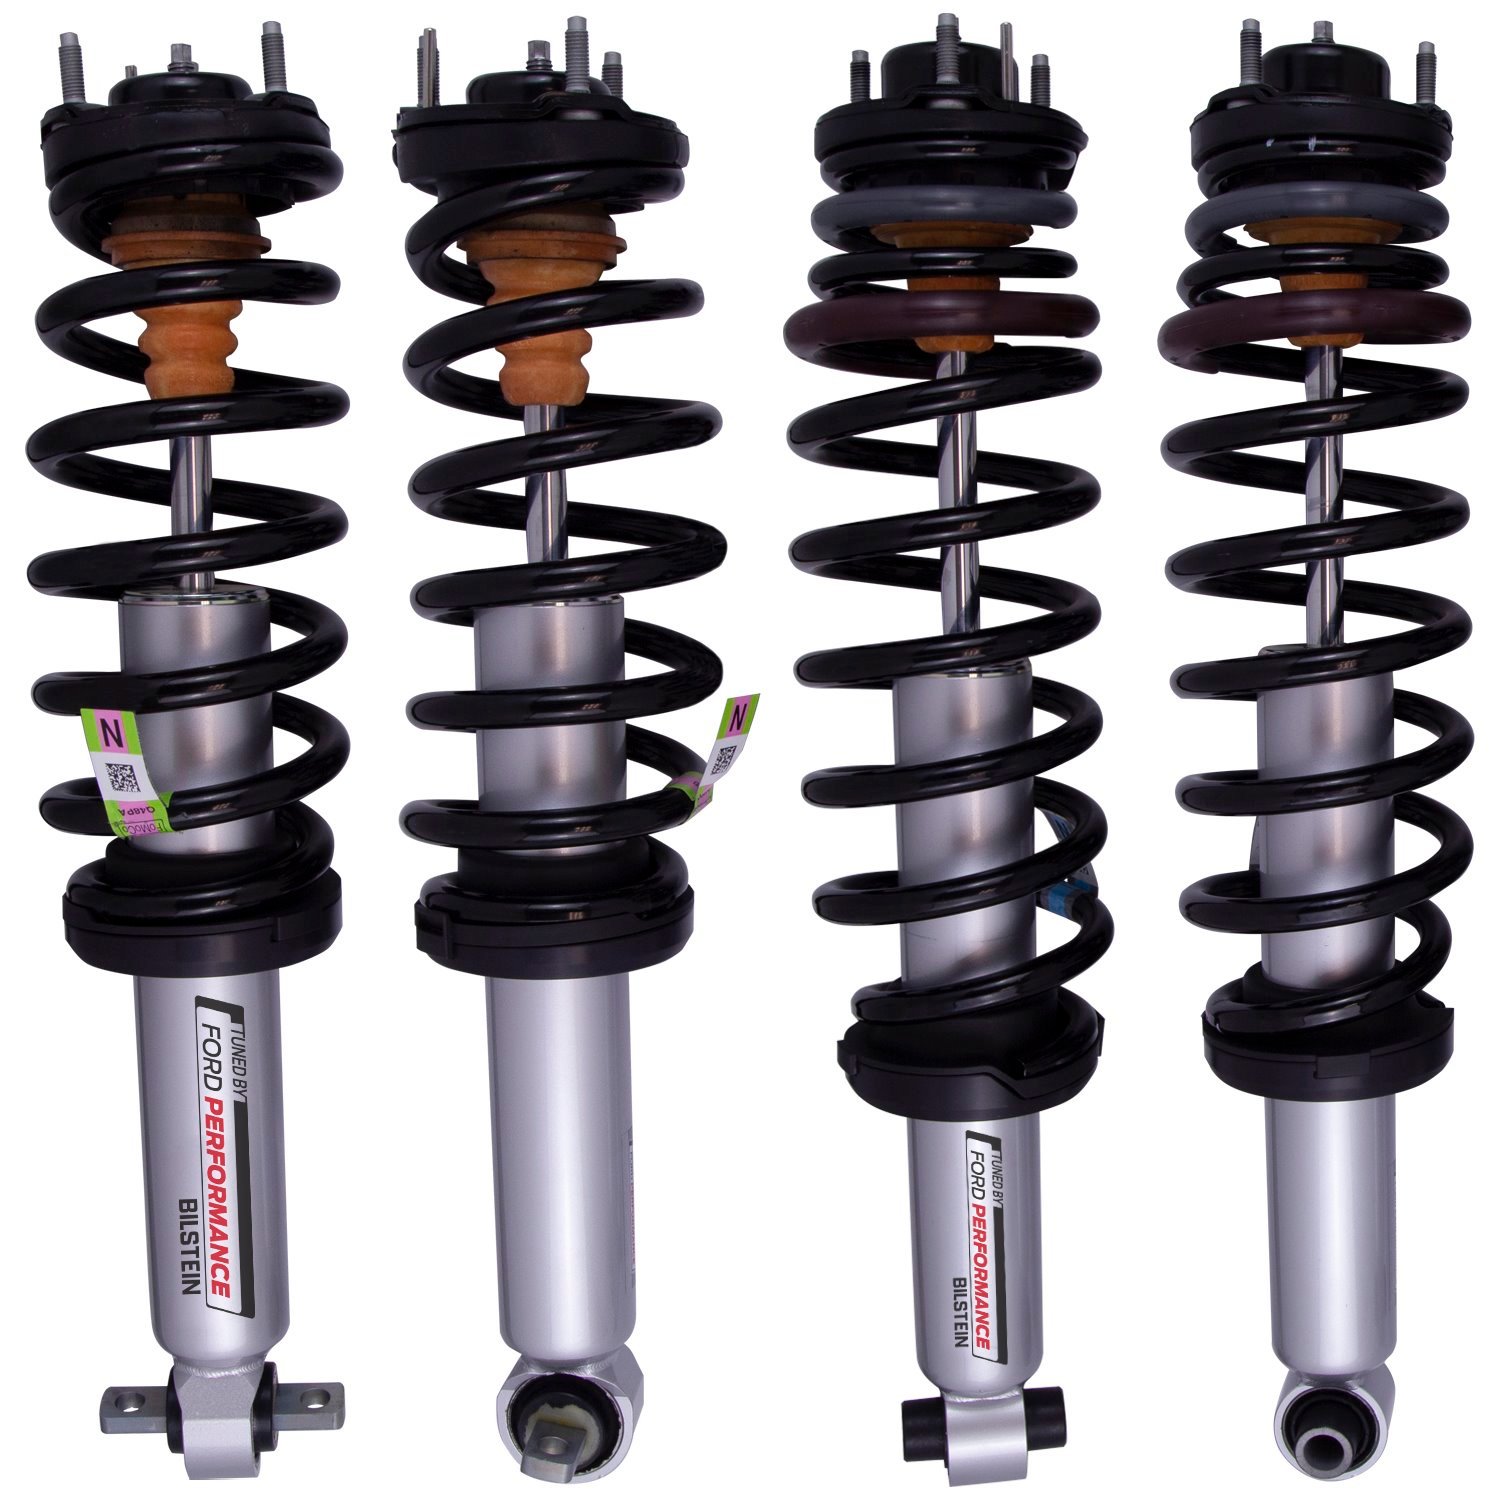 M-18000-B1A Off-Road Coil-Over Lift Kit Fits Gen 6 Ford Bronco 2-Door [+ 2 in. Lift]